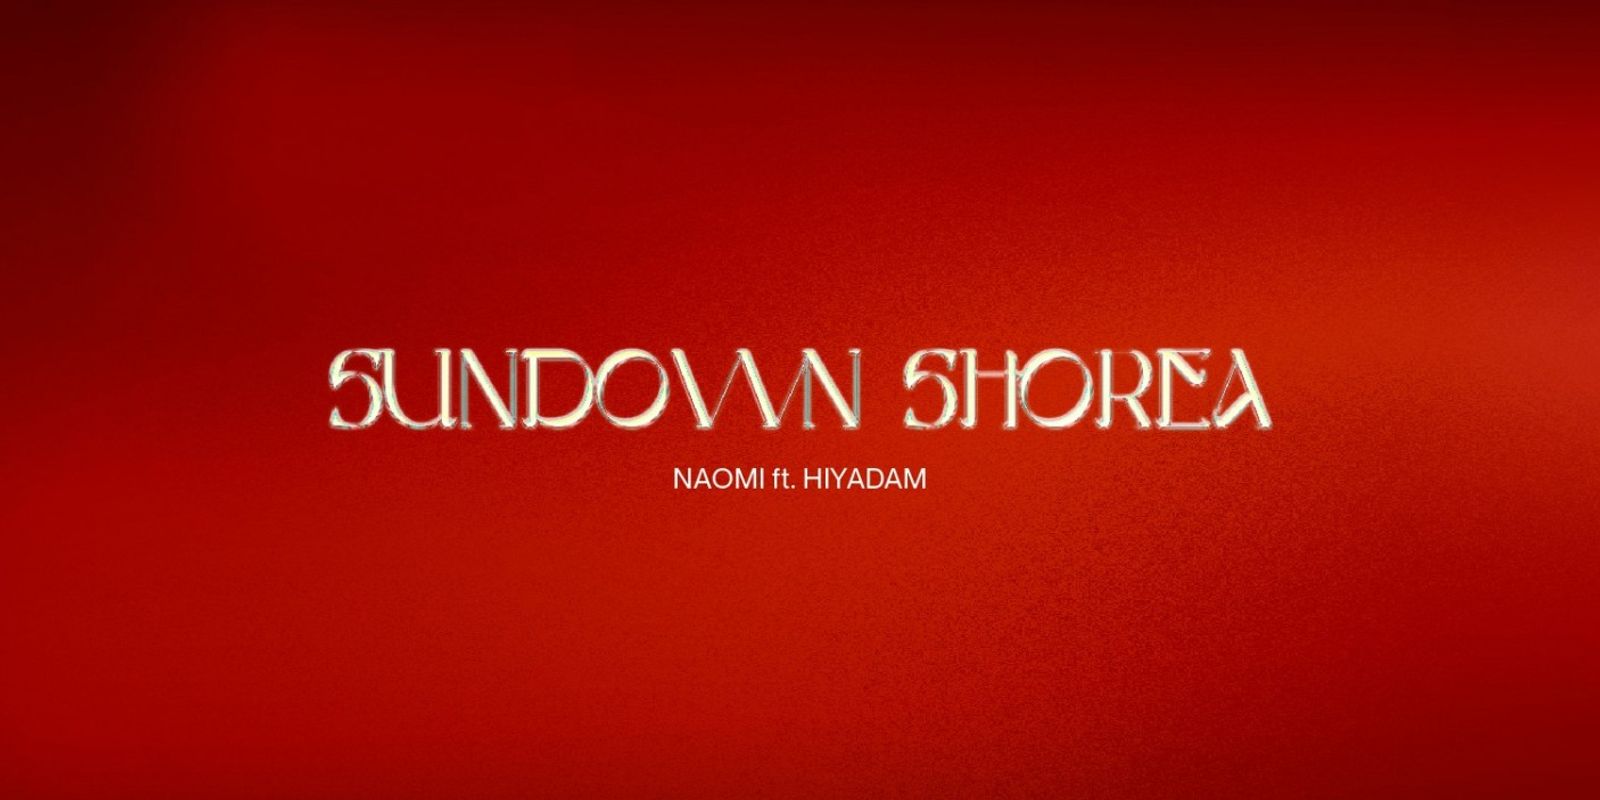 Image of The song Sundown Shorea premieres at the "sunset" of 2020, but will soon shine in the "dawn" of 2021 with Naomi, Rapper HIYADAM and M.A.U Collective